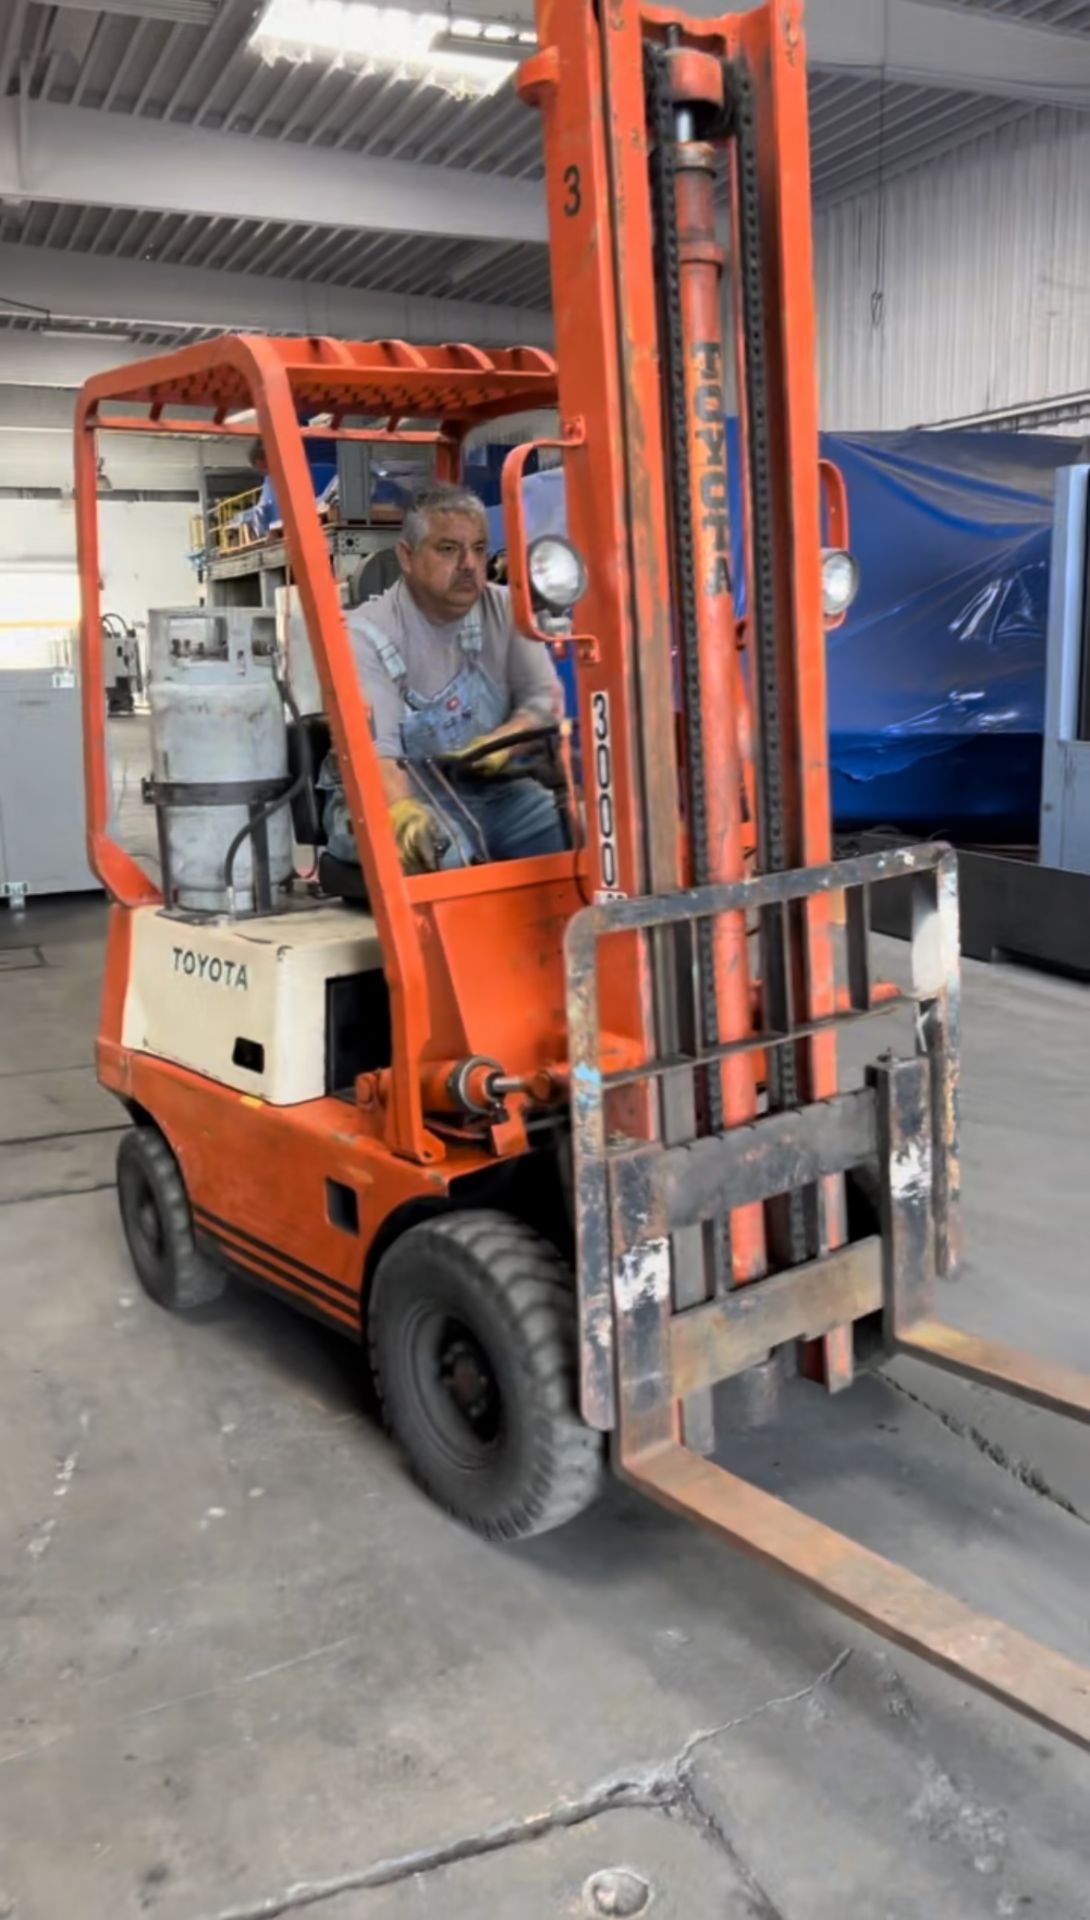 Toyota Forklift 3,000 Pound Capacity, 42" Forks Single Stage, Propane - Image 3 of 4